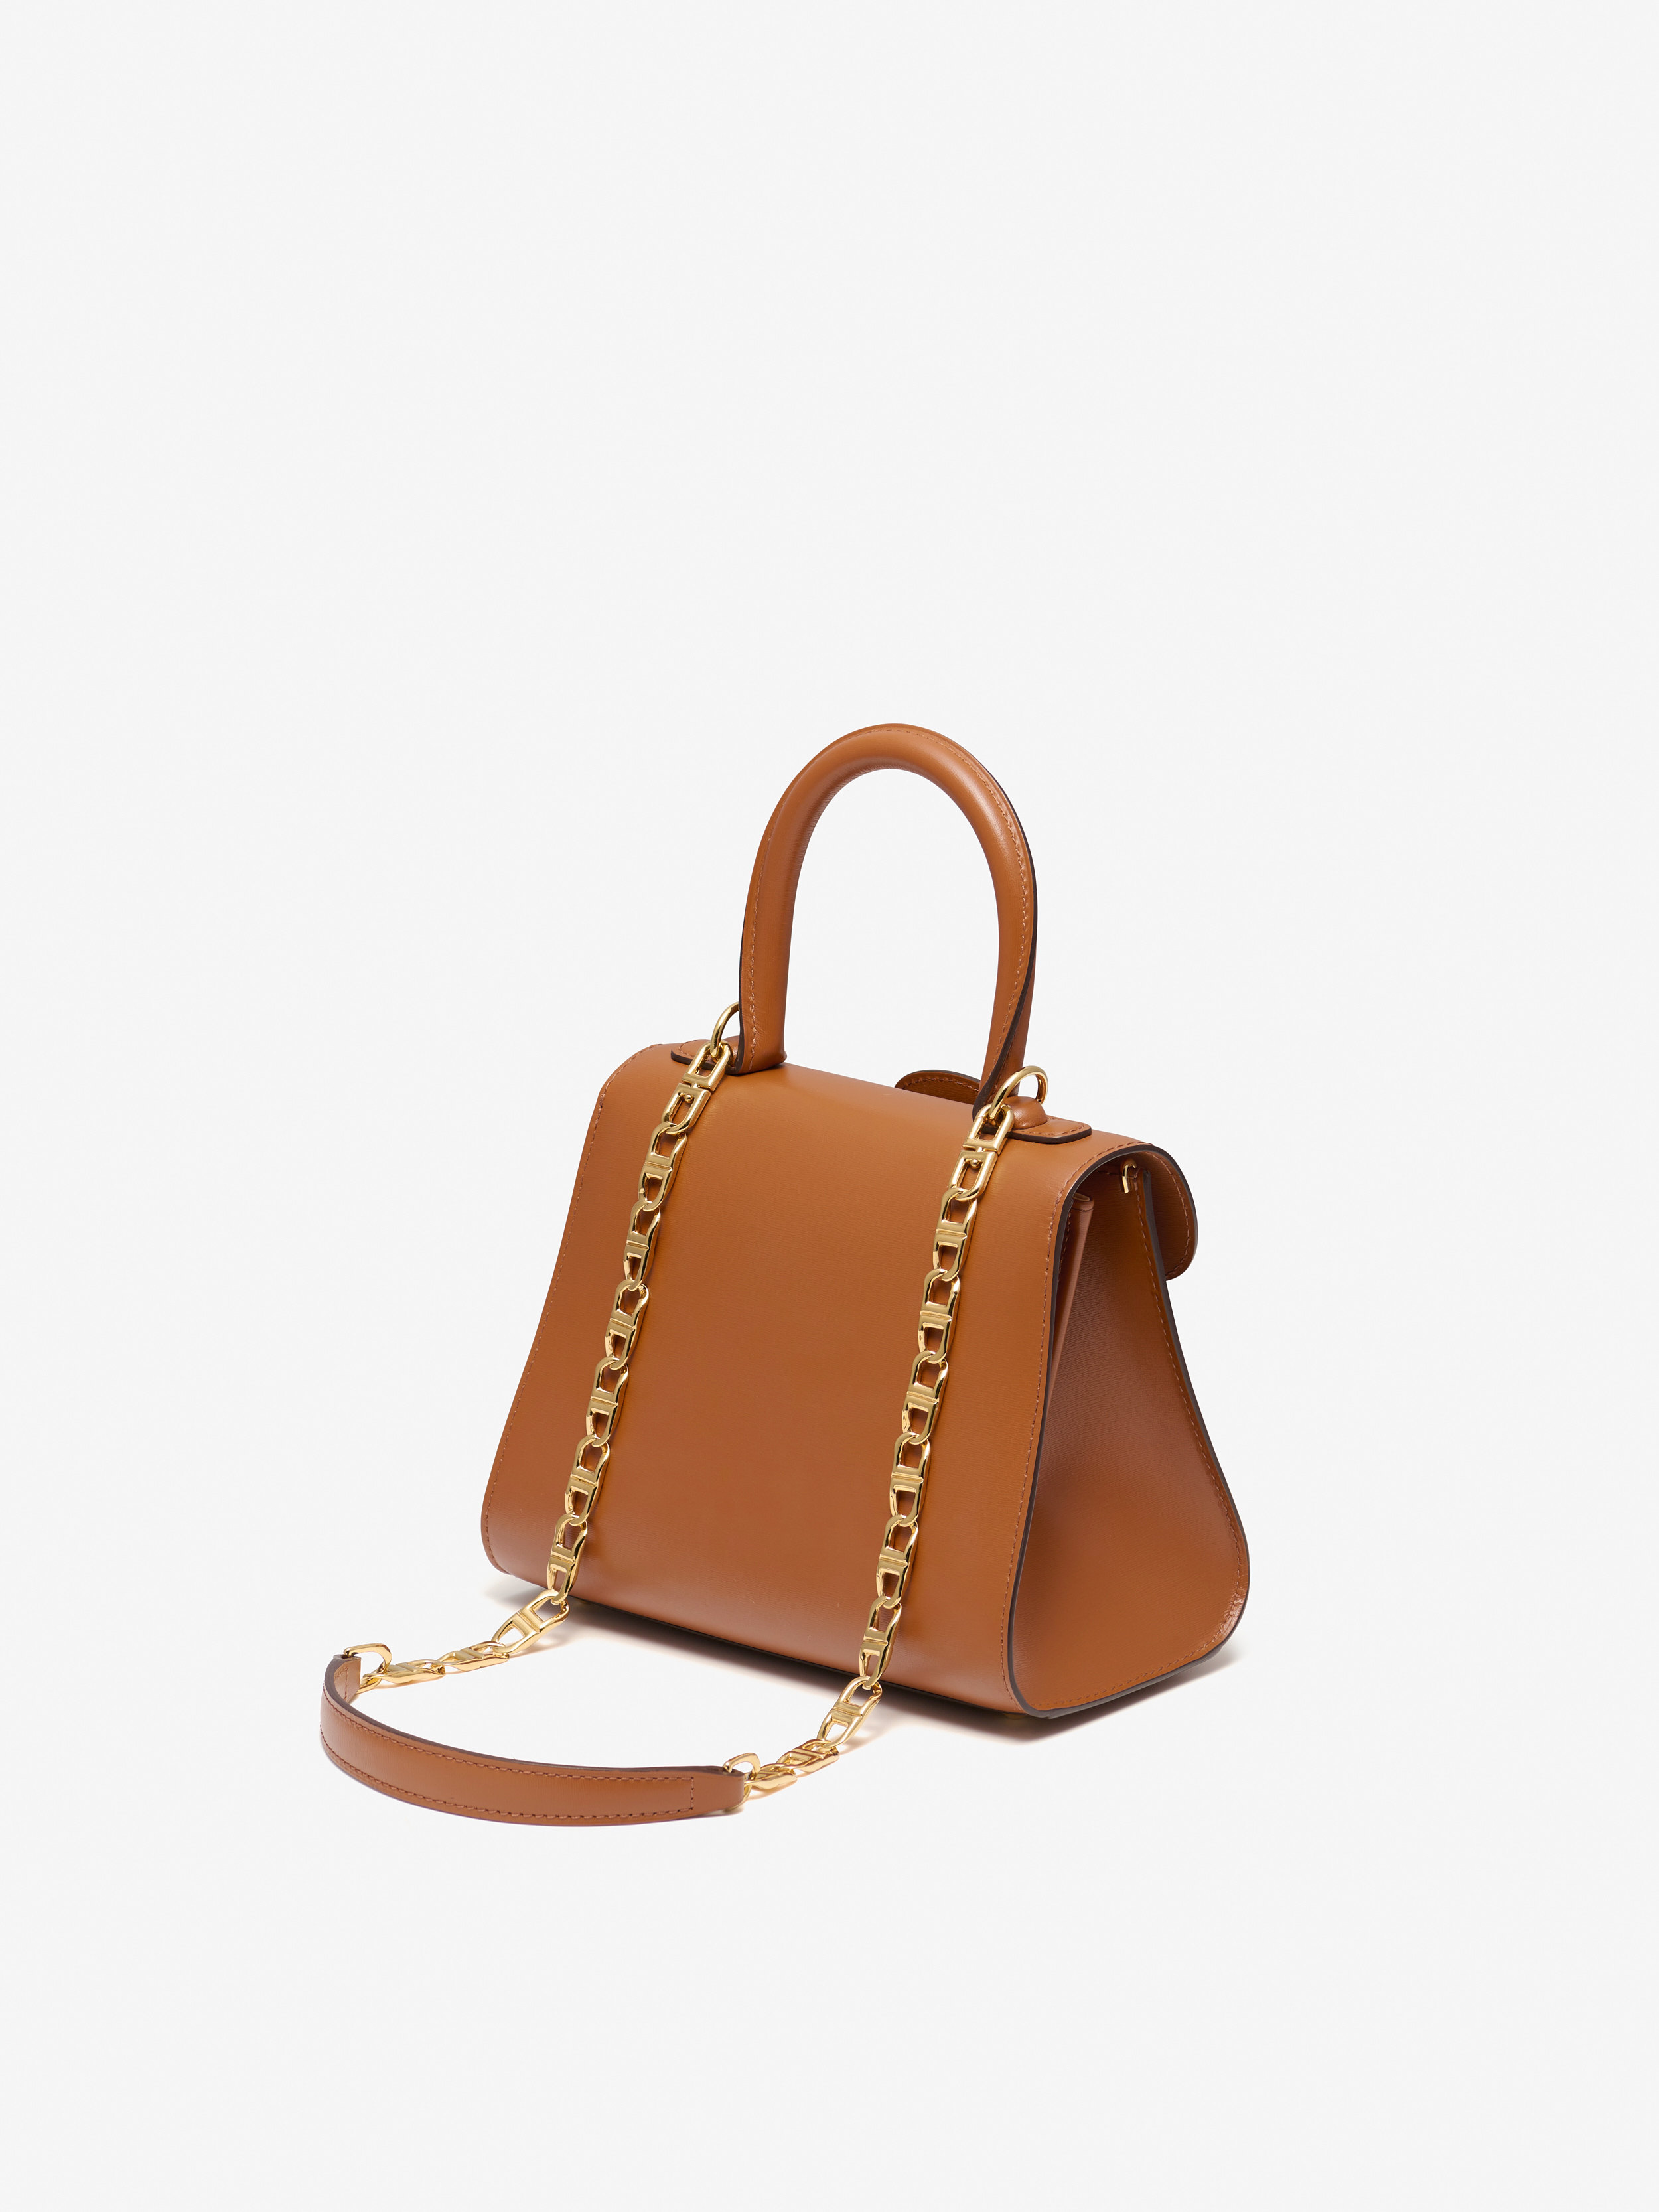 DELVAUX＊Tempete Short D Chain Strap 訳あり品送料無料 - バッグ